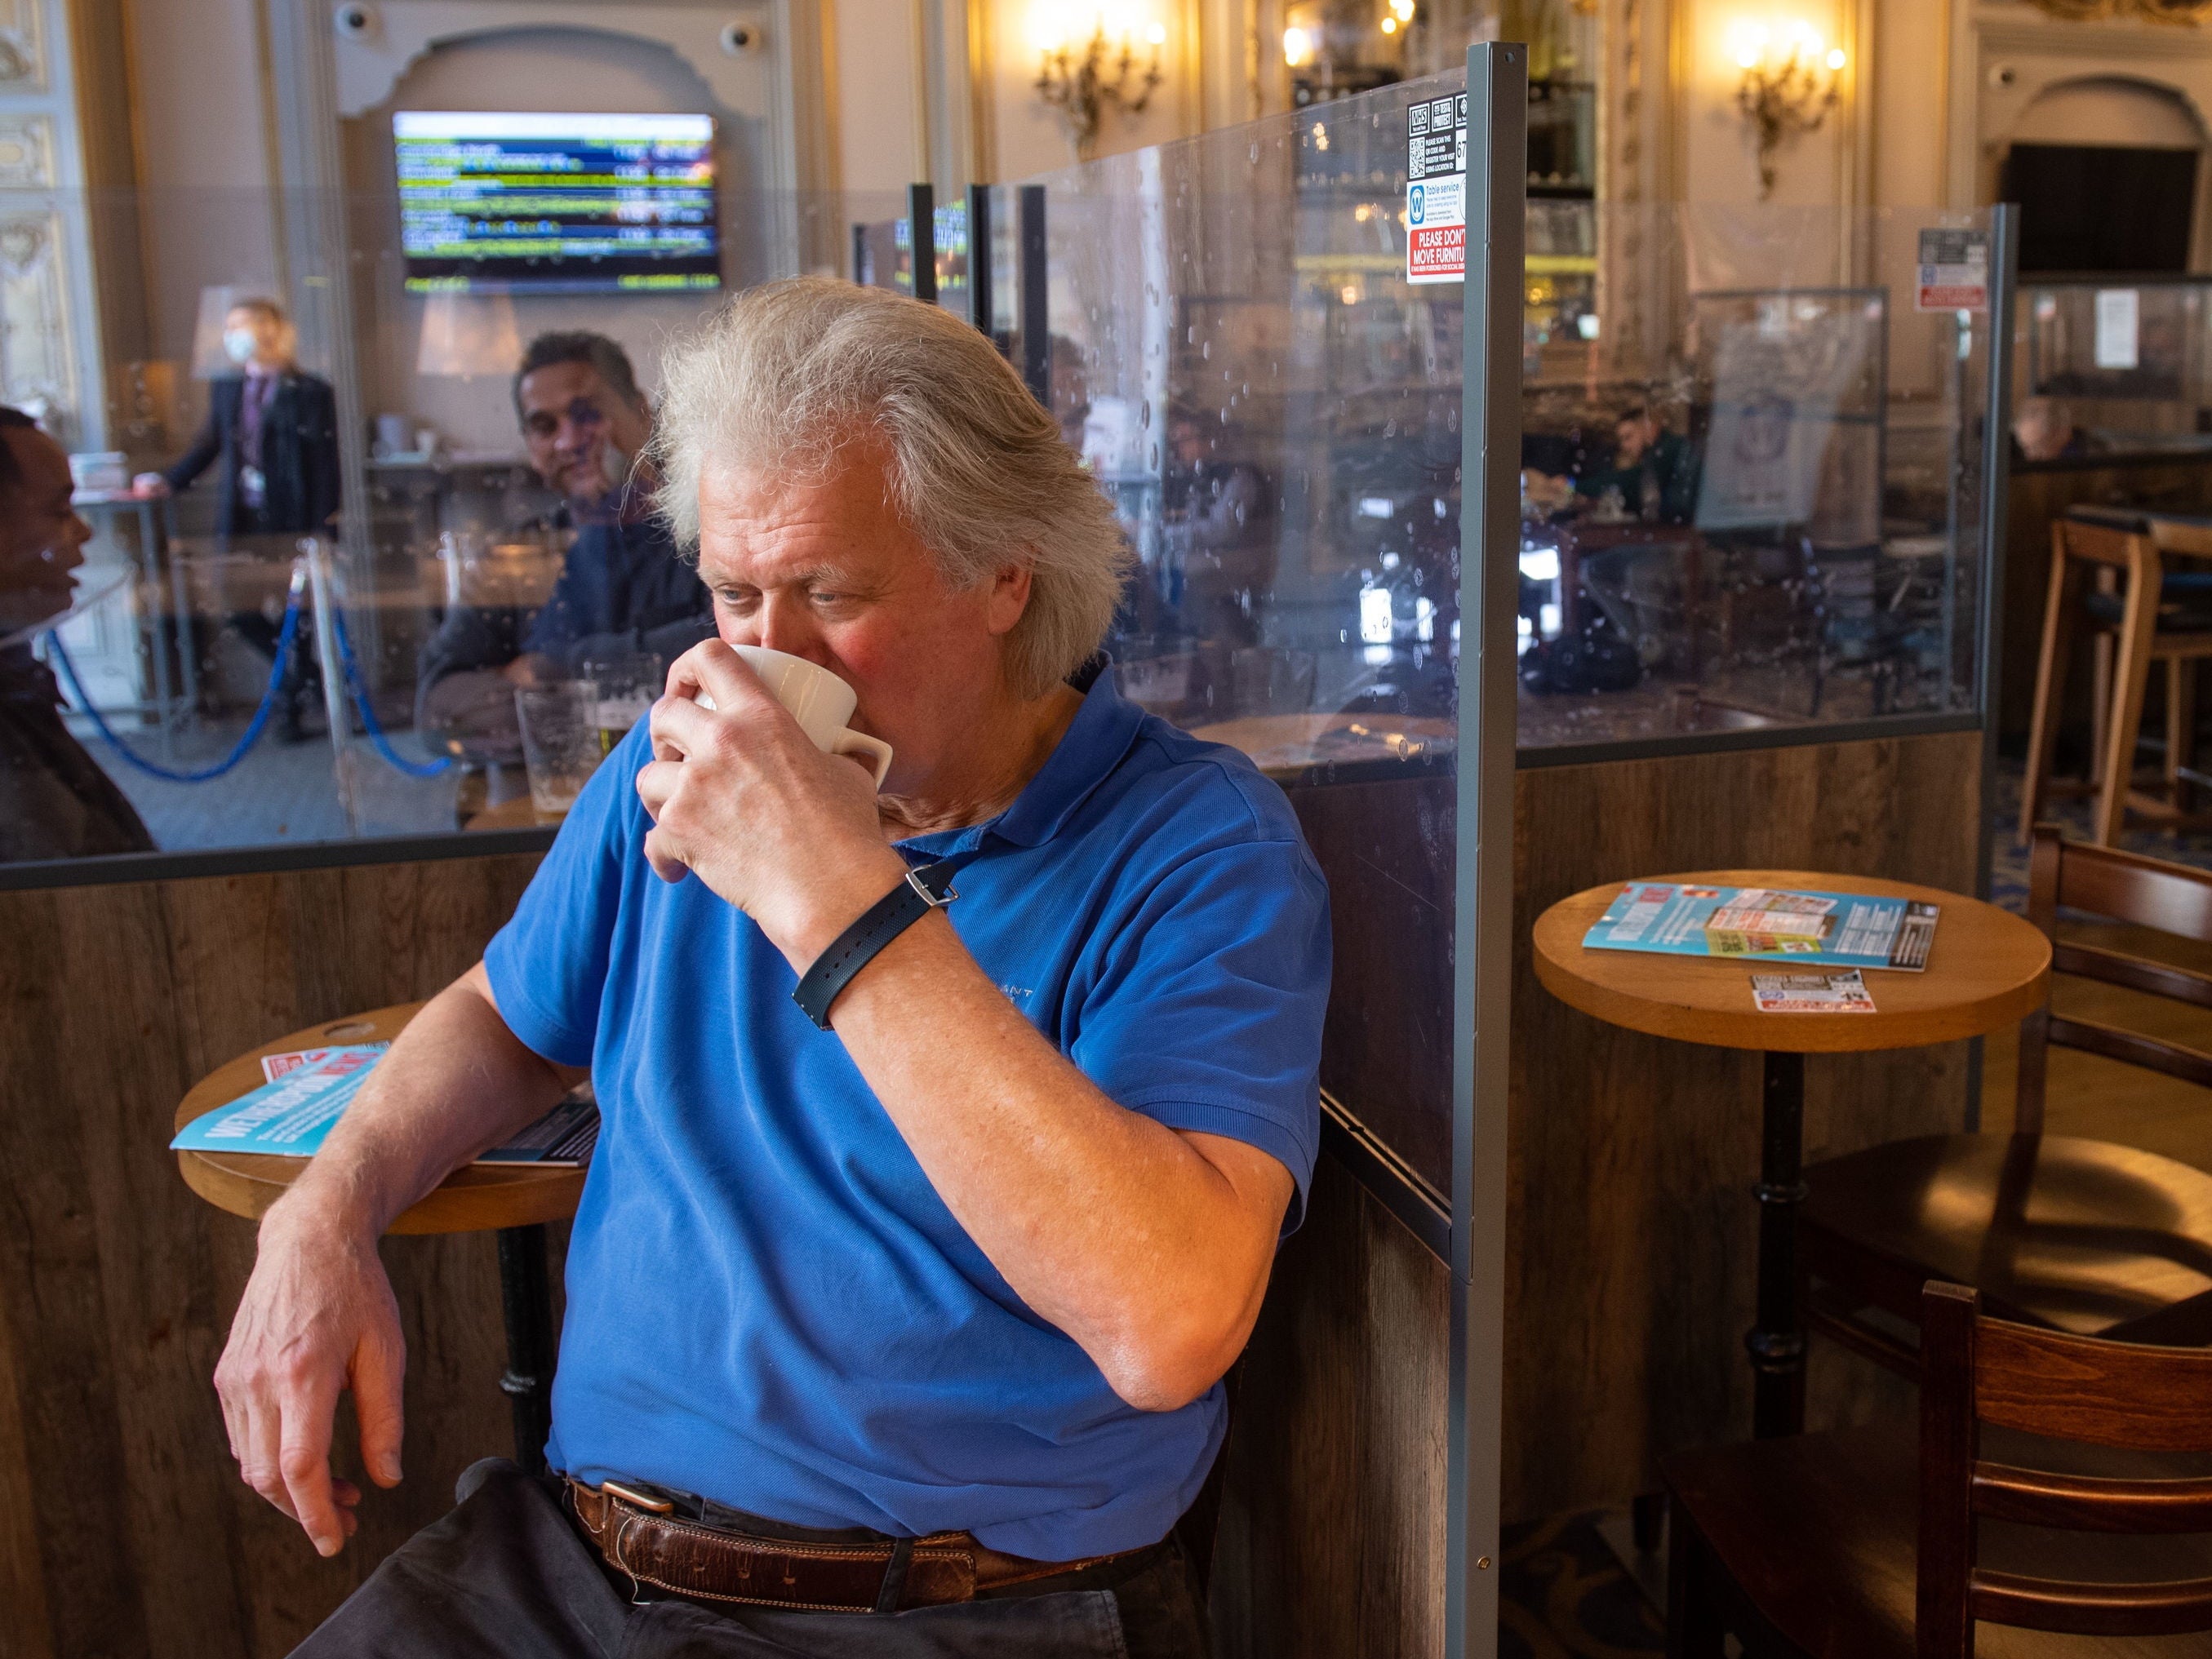 Tim Martin, the Wetherspoon chair, disagrees with how ministers have tackled the virus